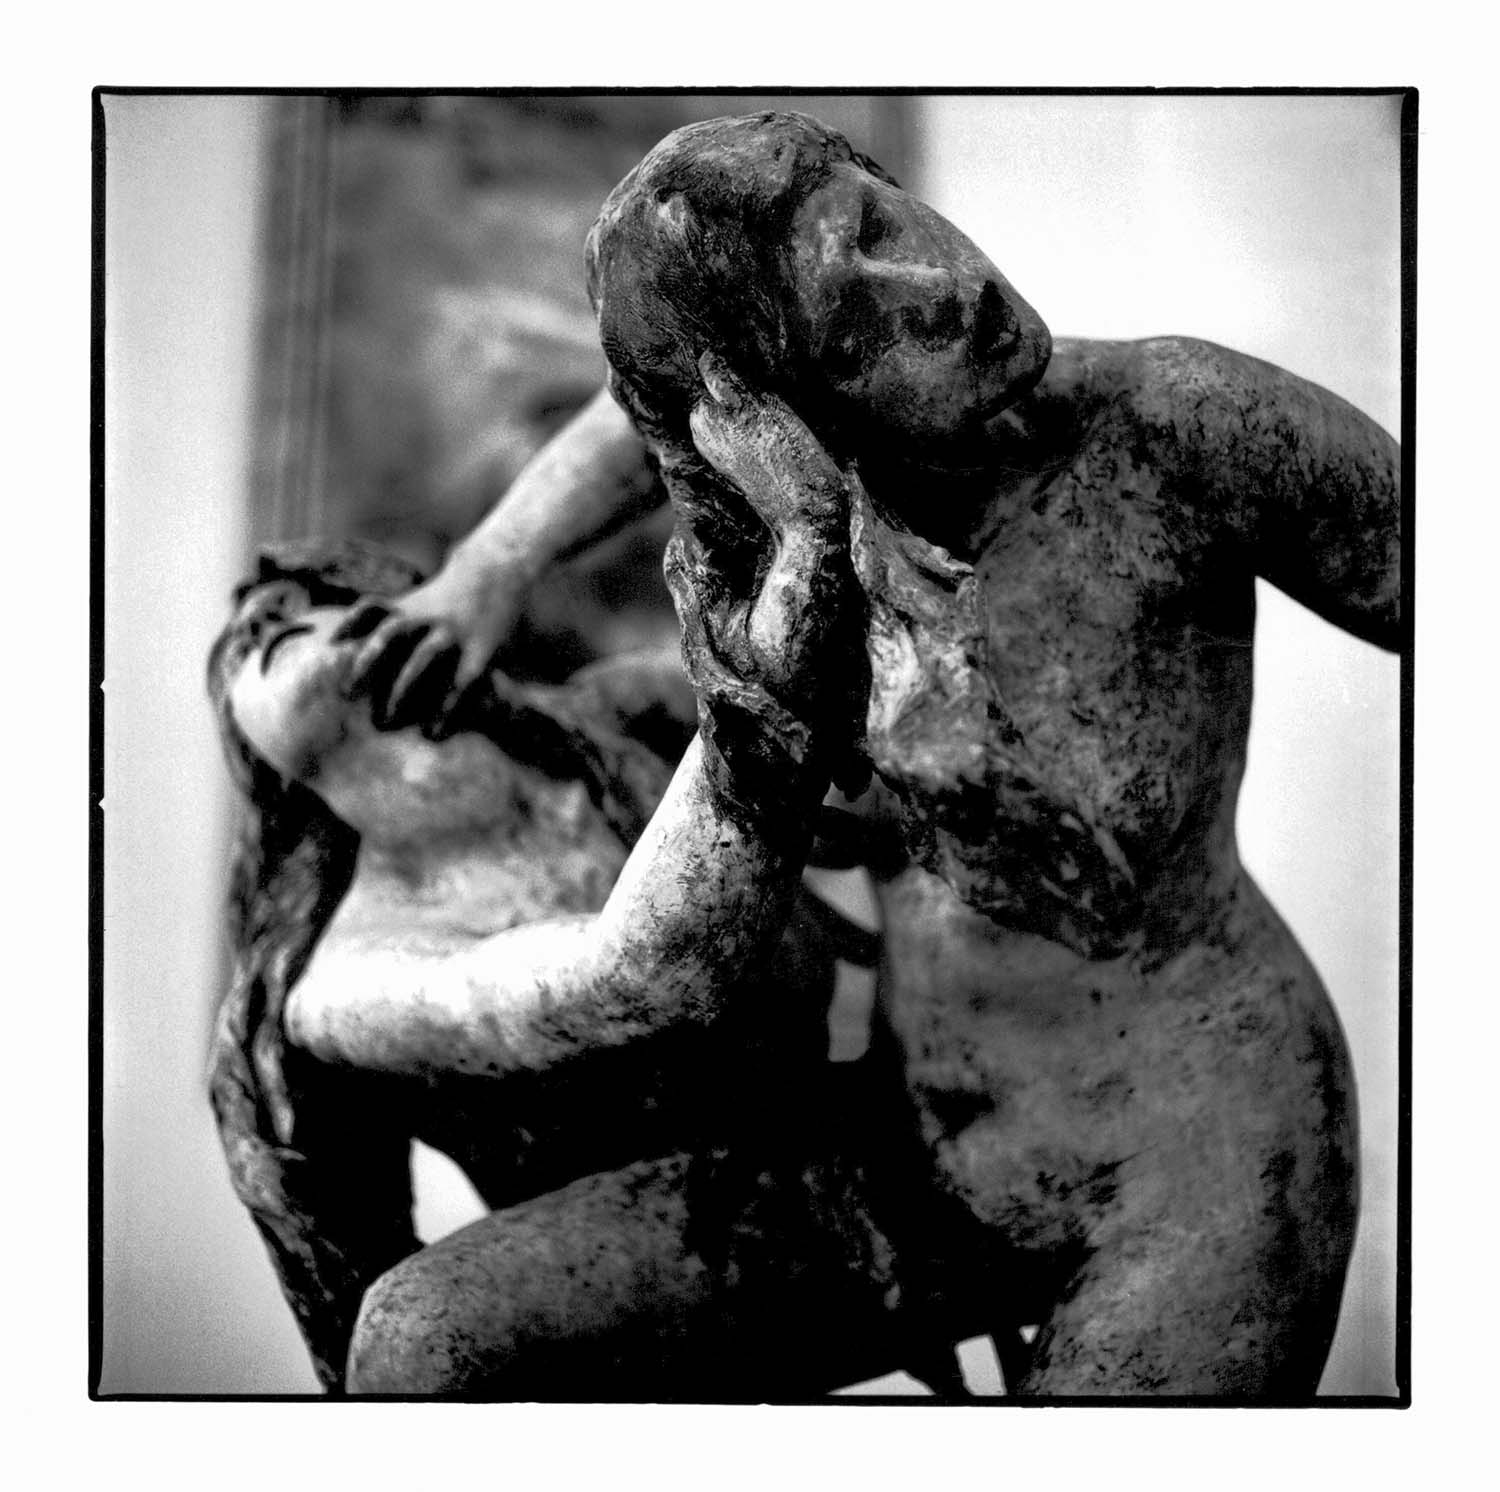 The darkroom gallery - Women fighting, a sculpture in Petit Palace, Paris.